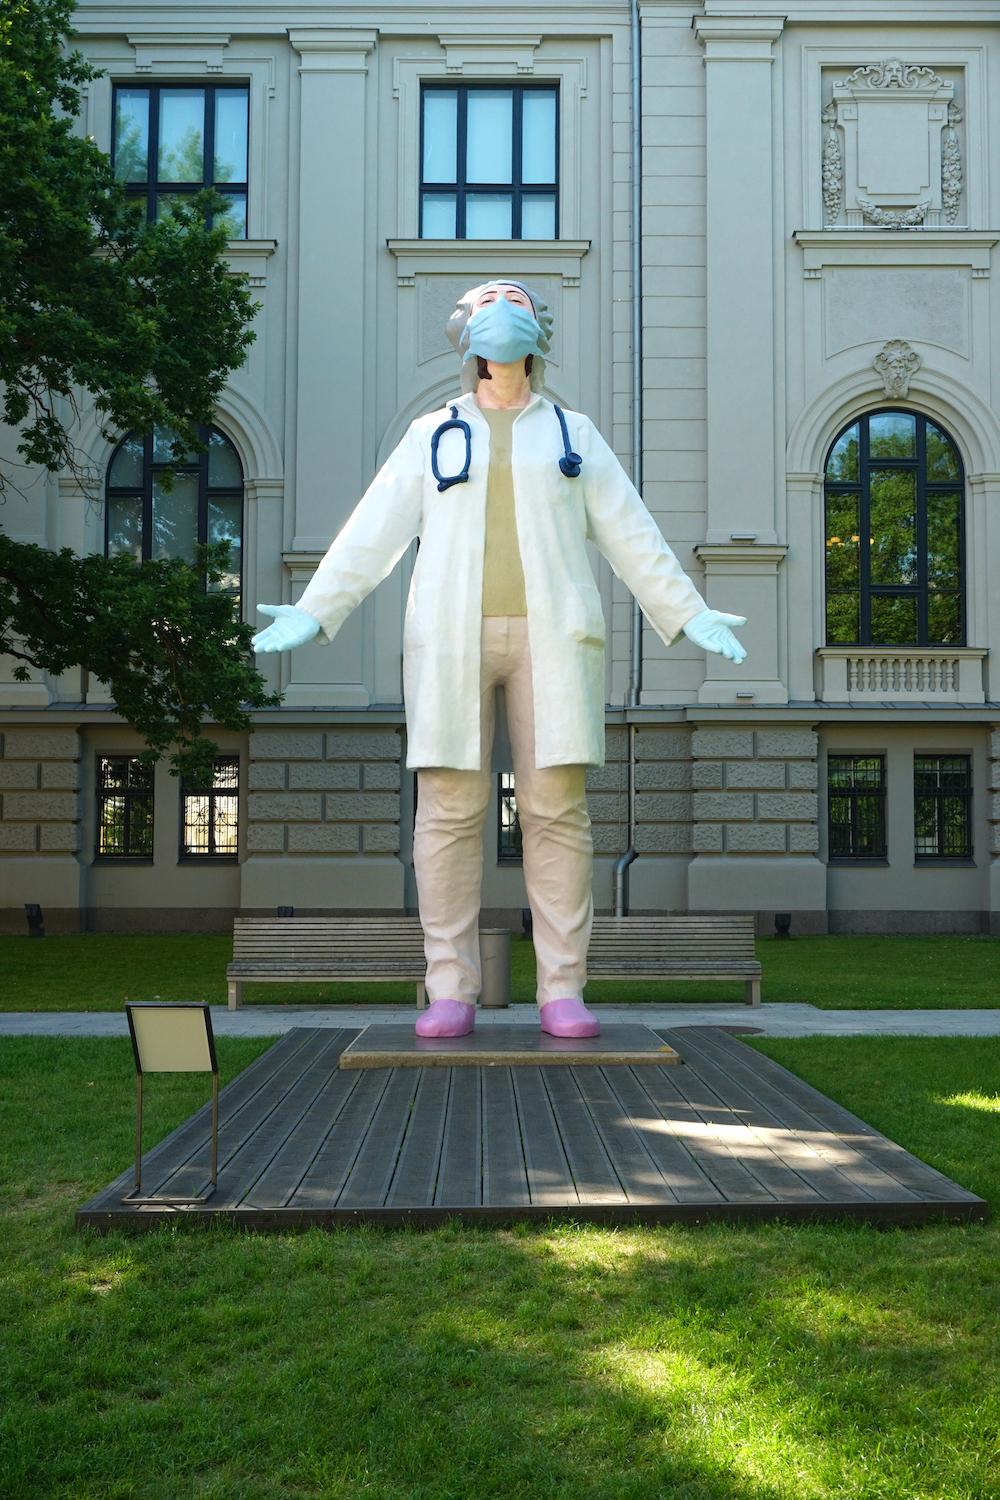 A 6-meter statue in Latvia honors medical workers for their relentless hard work amid the battle against the pandemic. (aijaphoto/Shutterstock)